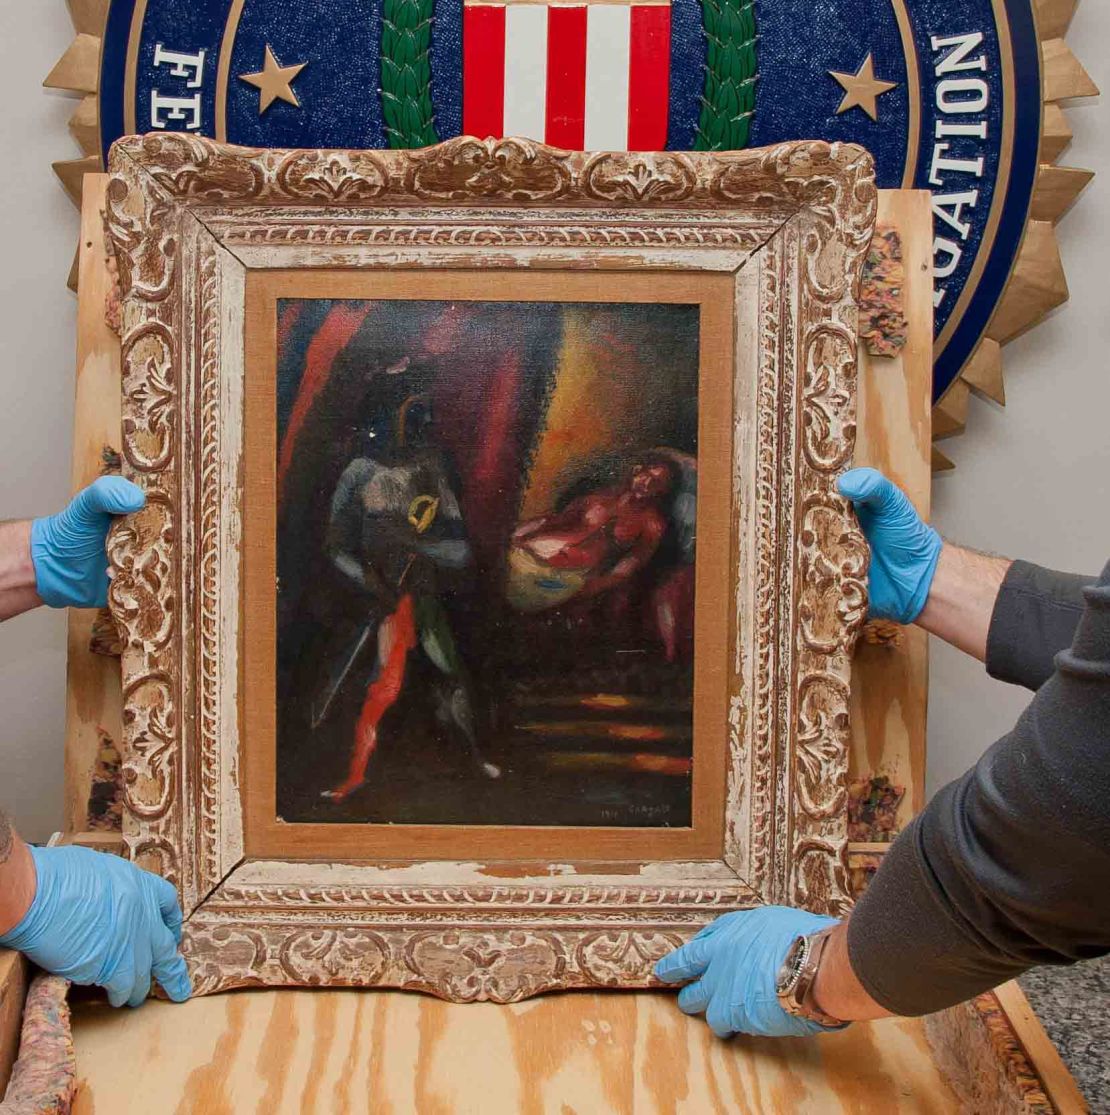 Personnel from the FBI's Art Crime Team handling the recovered Chagall painting, "Othello and Desdemona."